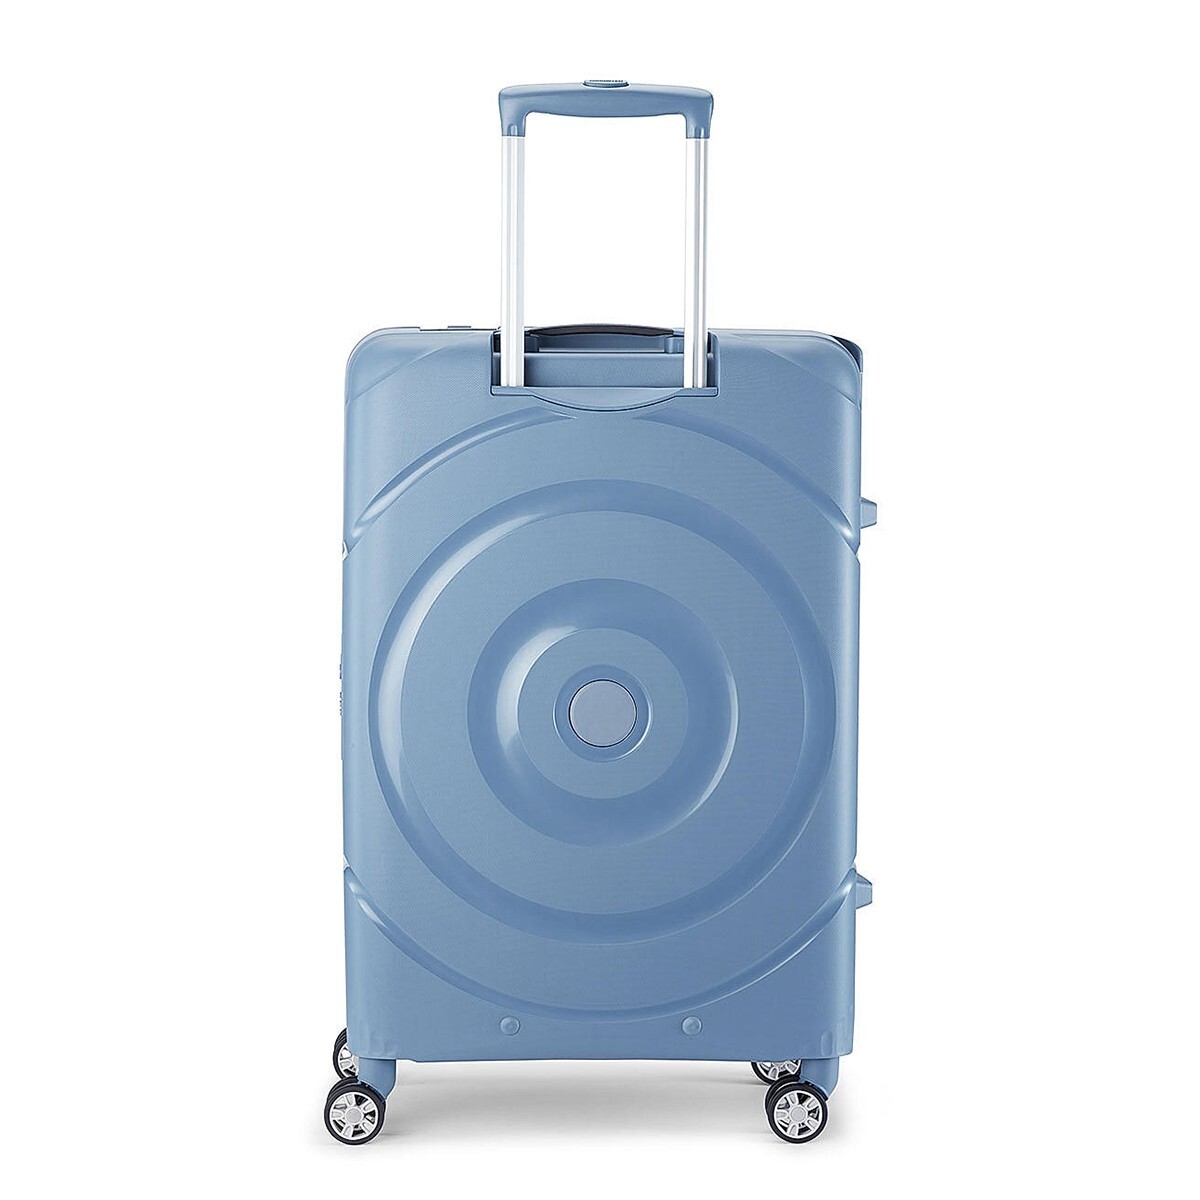 American Tourister Hard Spinner Circurity 68cm Grey